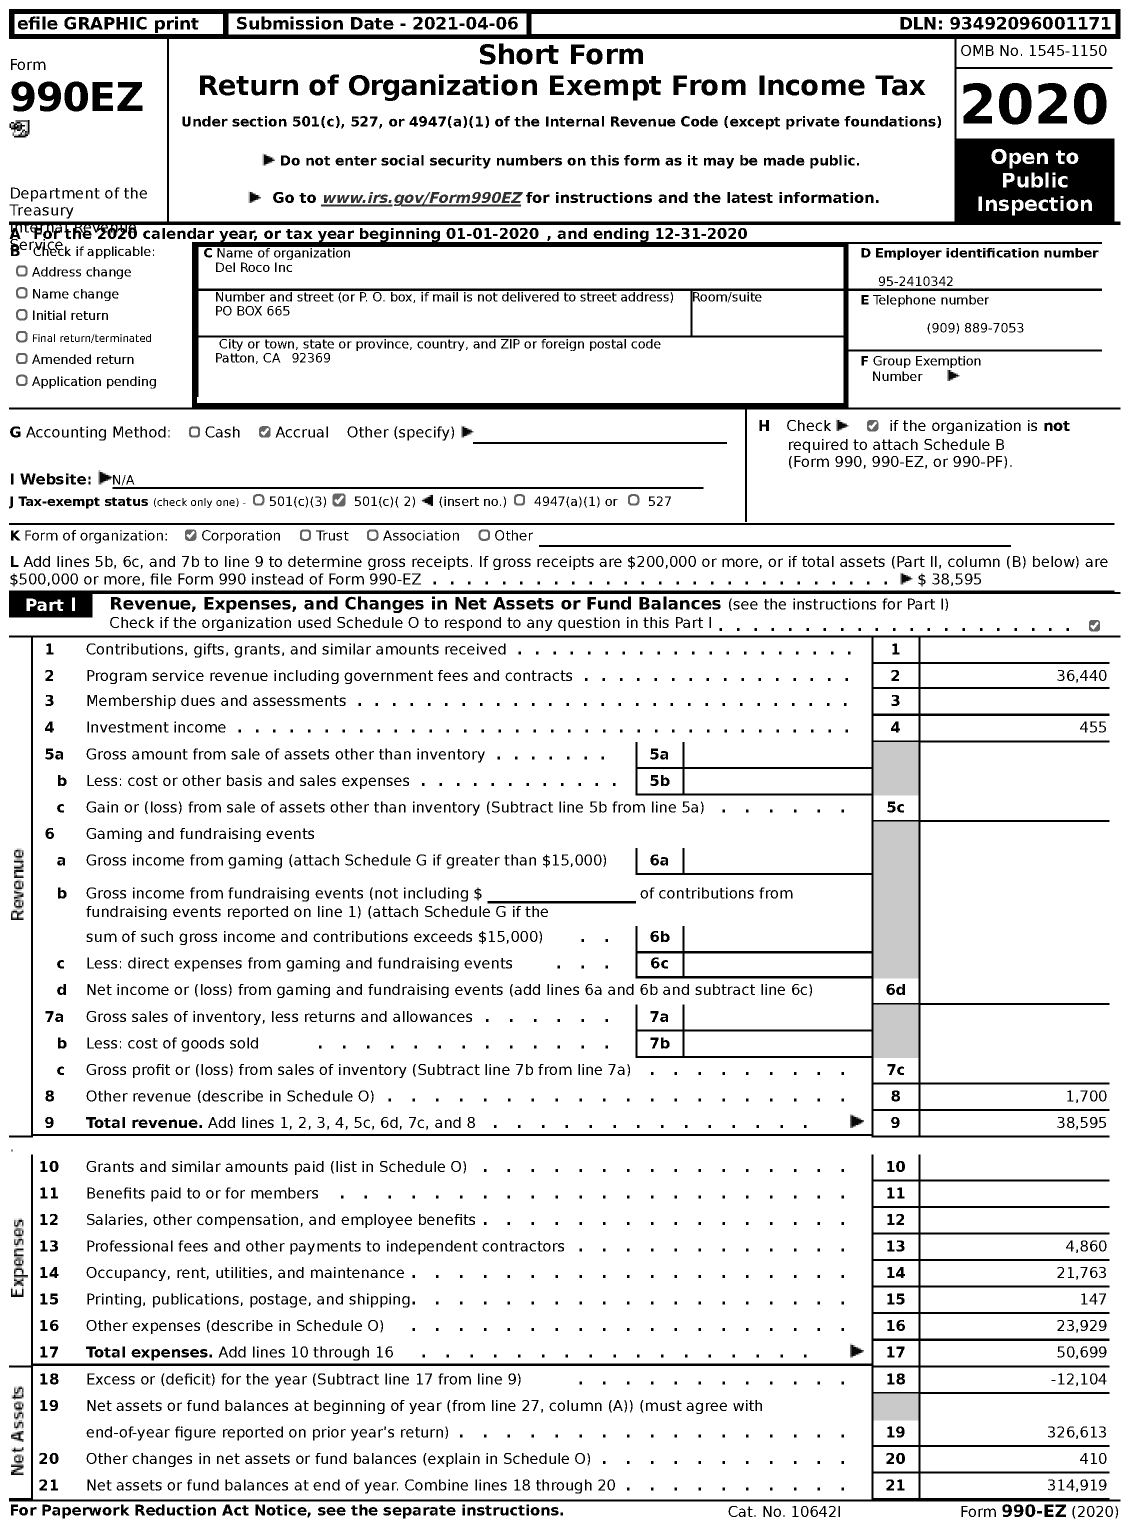 Image of first page of 2020 Form 990EZ for Del Roco